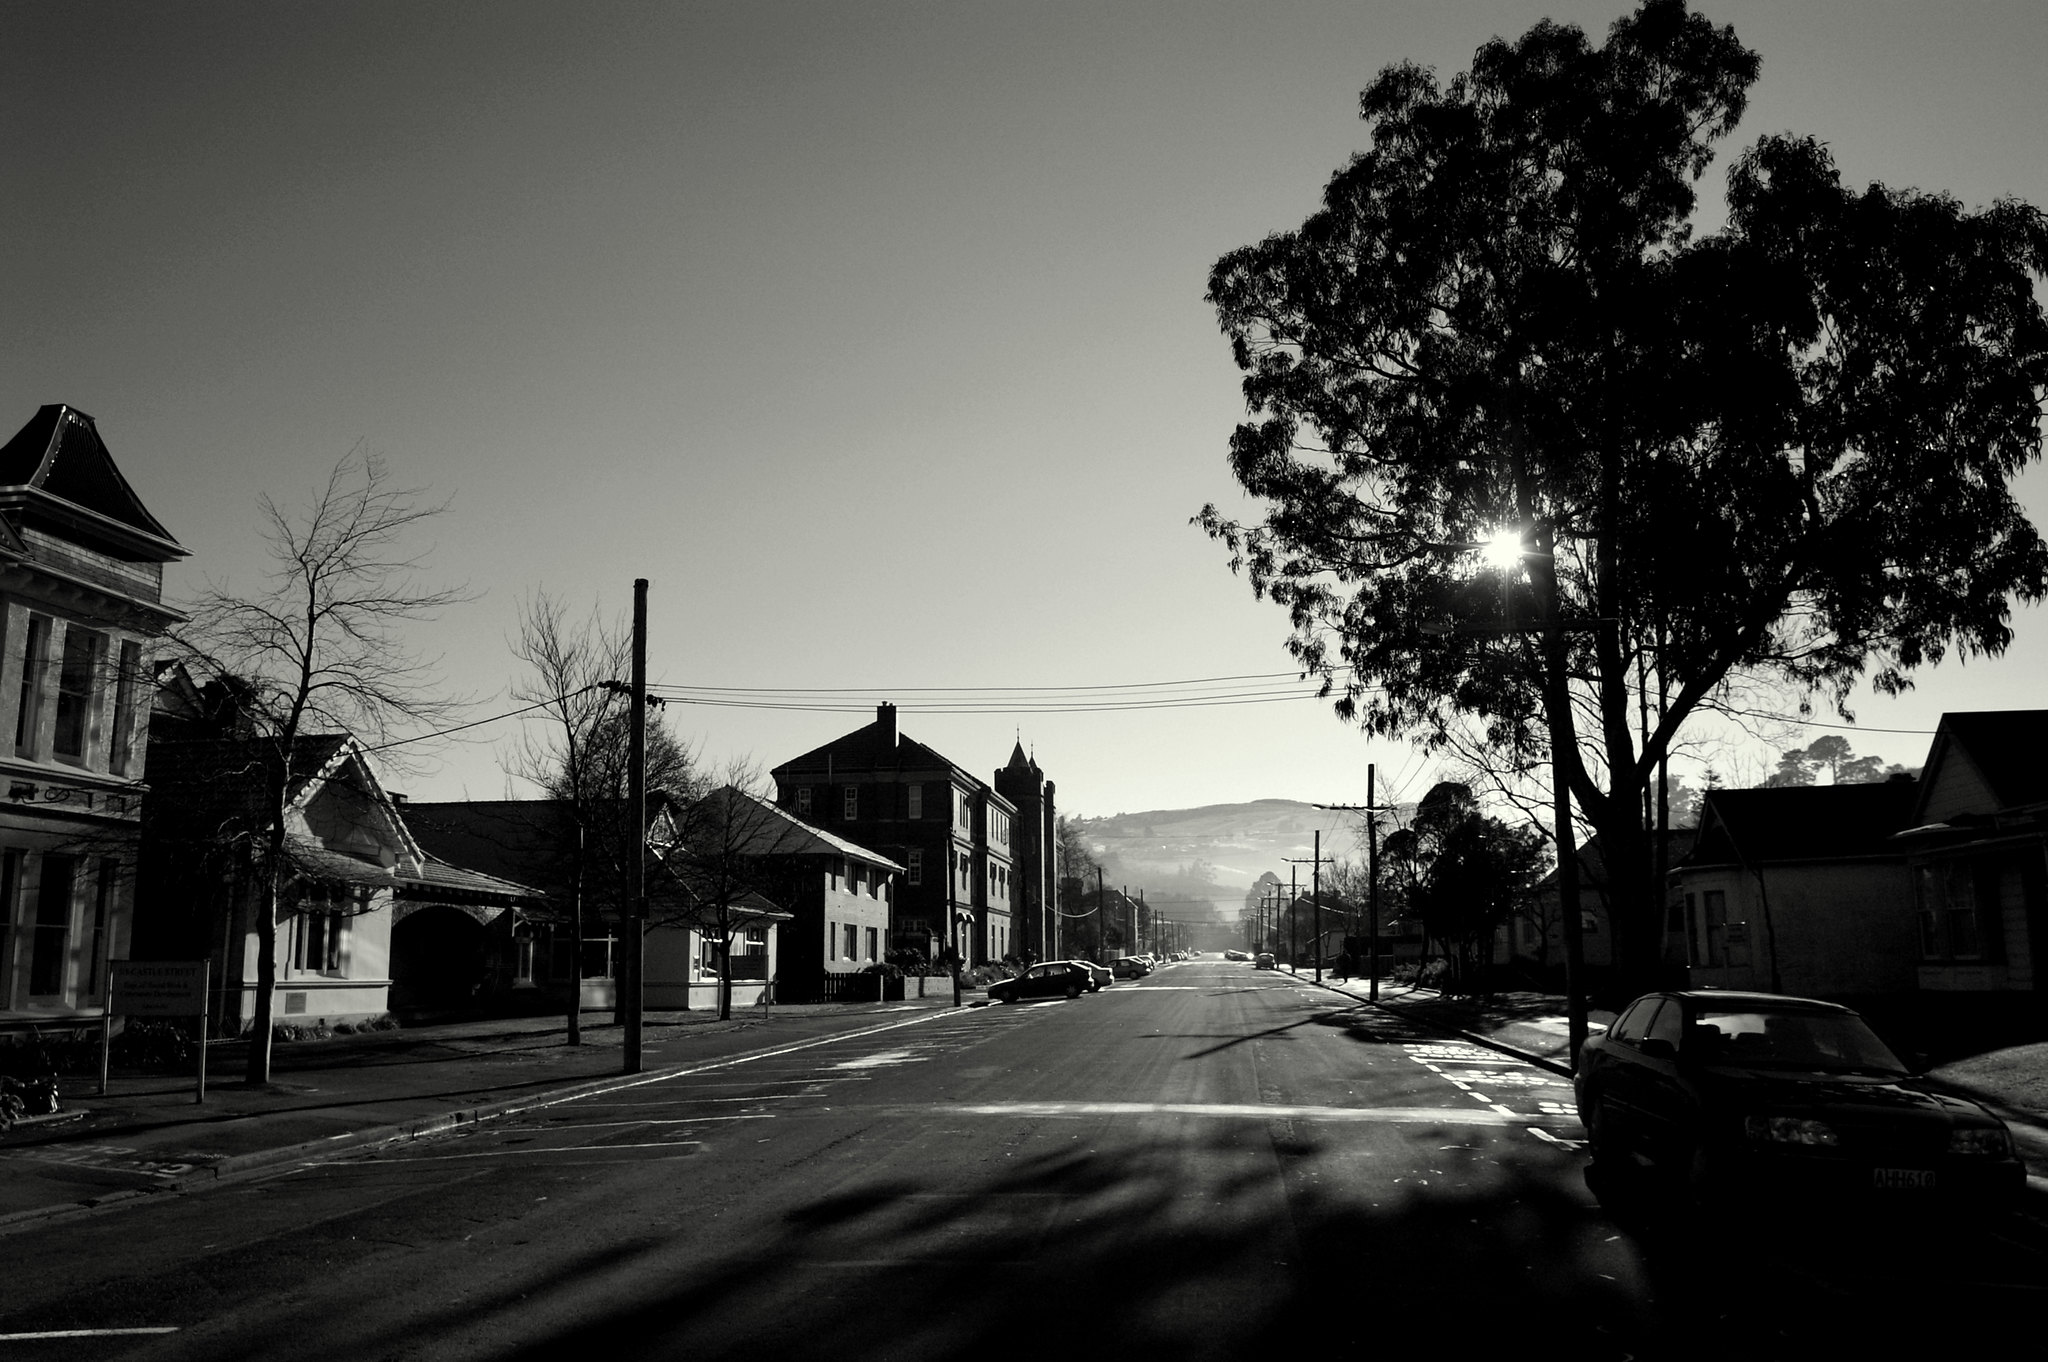 A black and white photo of a desolate street with houses on the left and trees on the right.